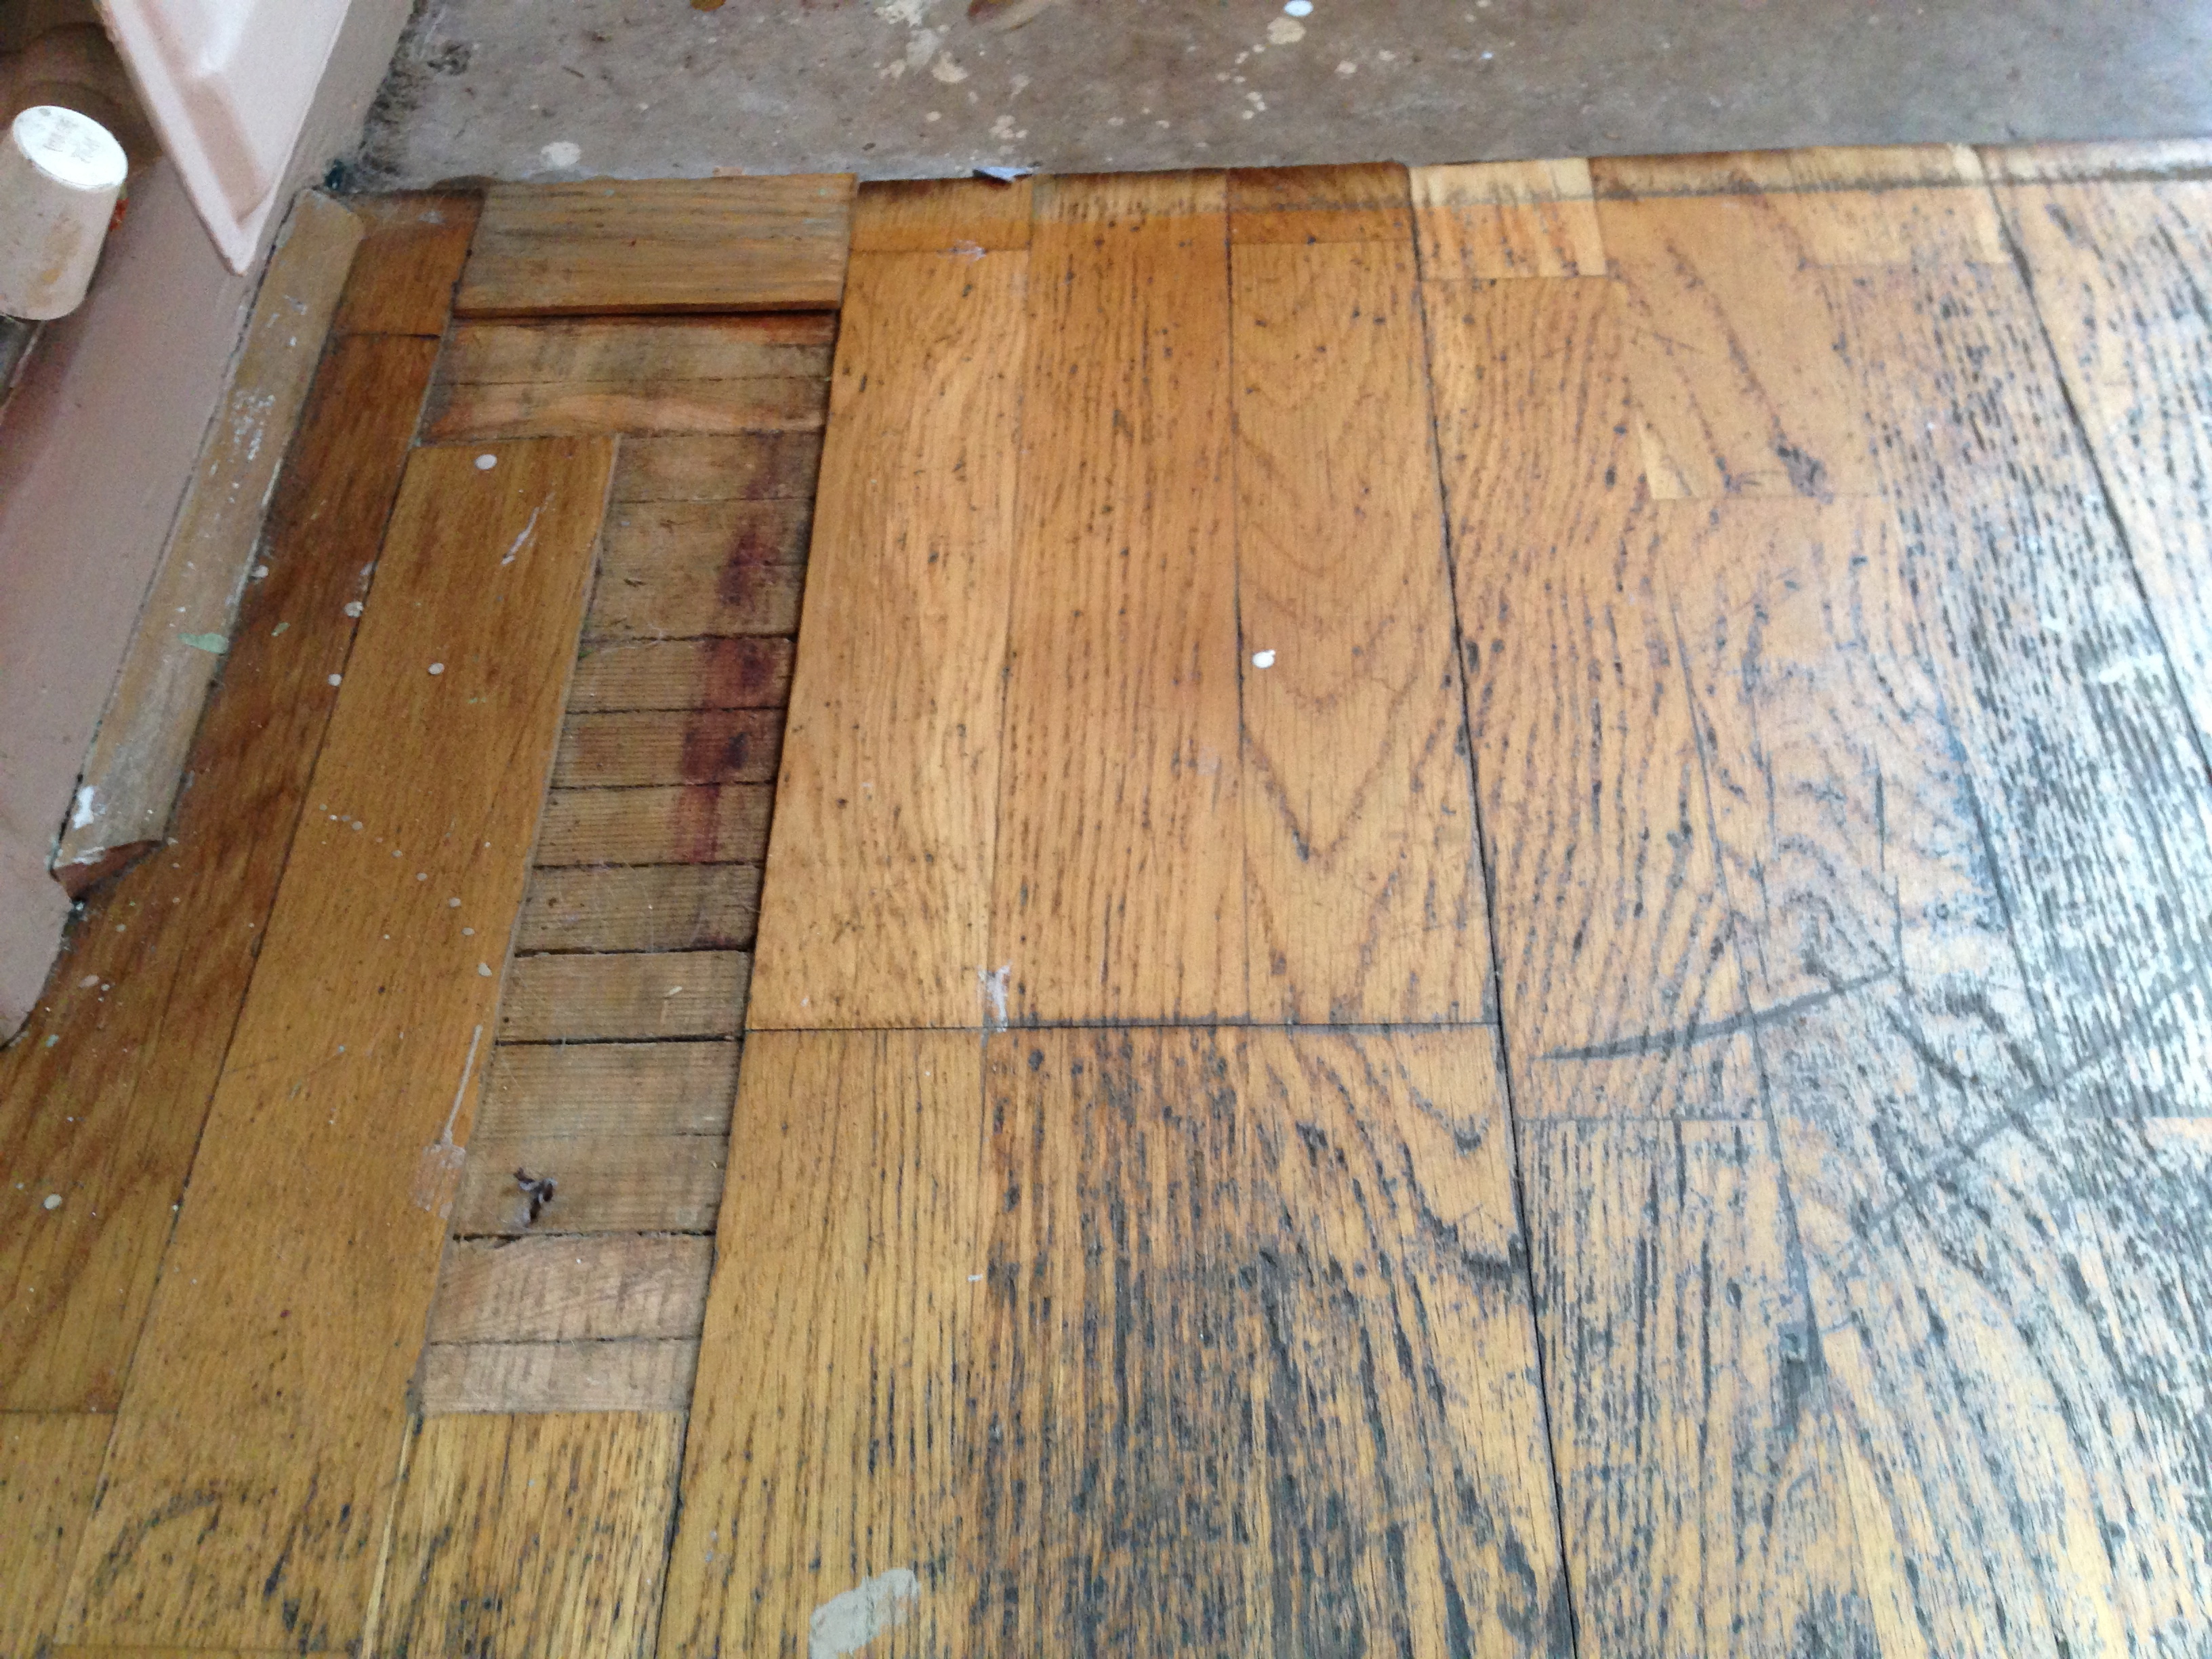 Laminate Wood Floor Restoration The, Can Laminate Floors Be Refinished